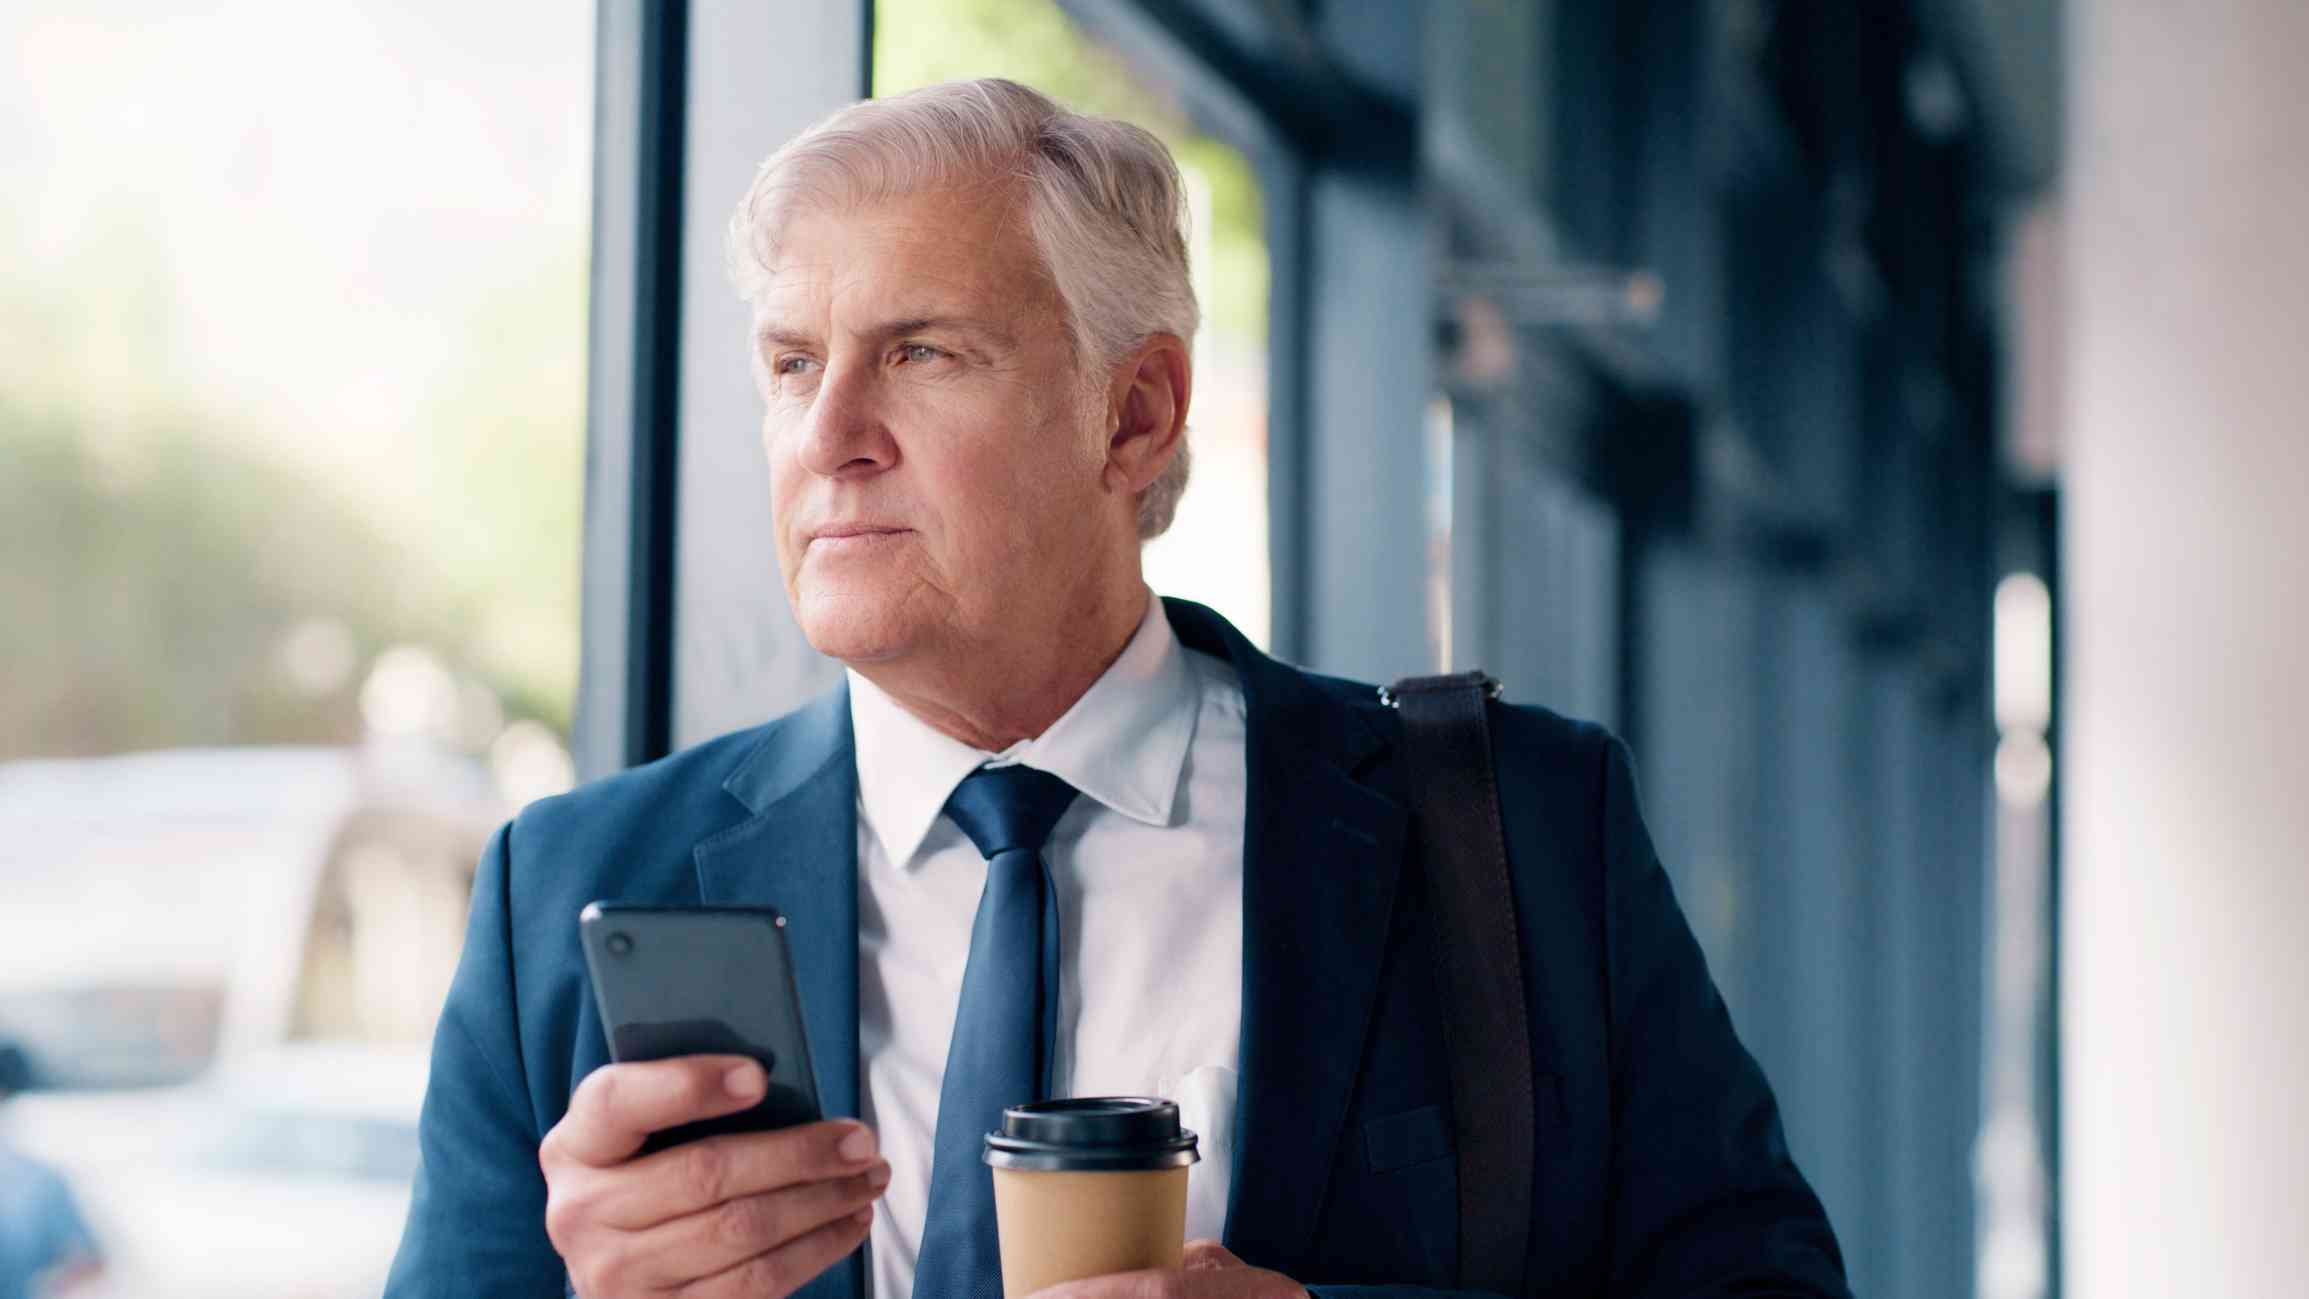 A middle aged man in a buisness suit stands near a window in an office buidling and gazes off deep in thought while holding his phone and a cup of to-go coffee.